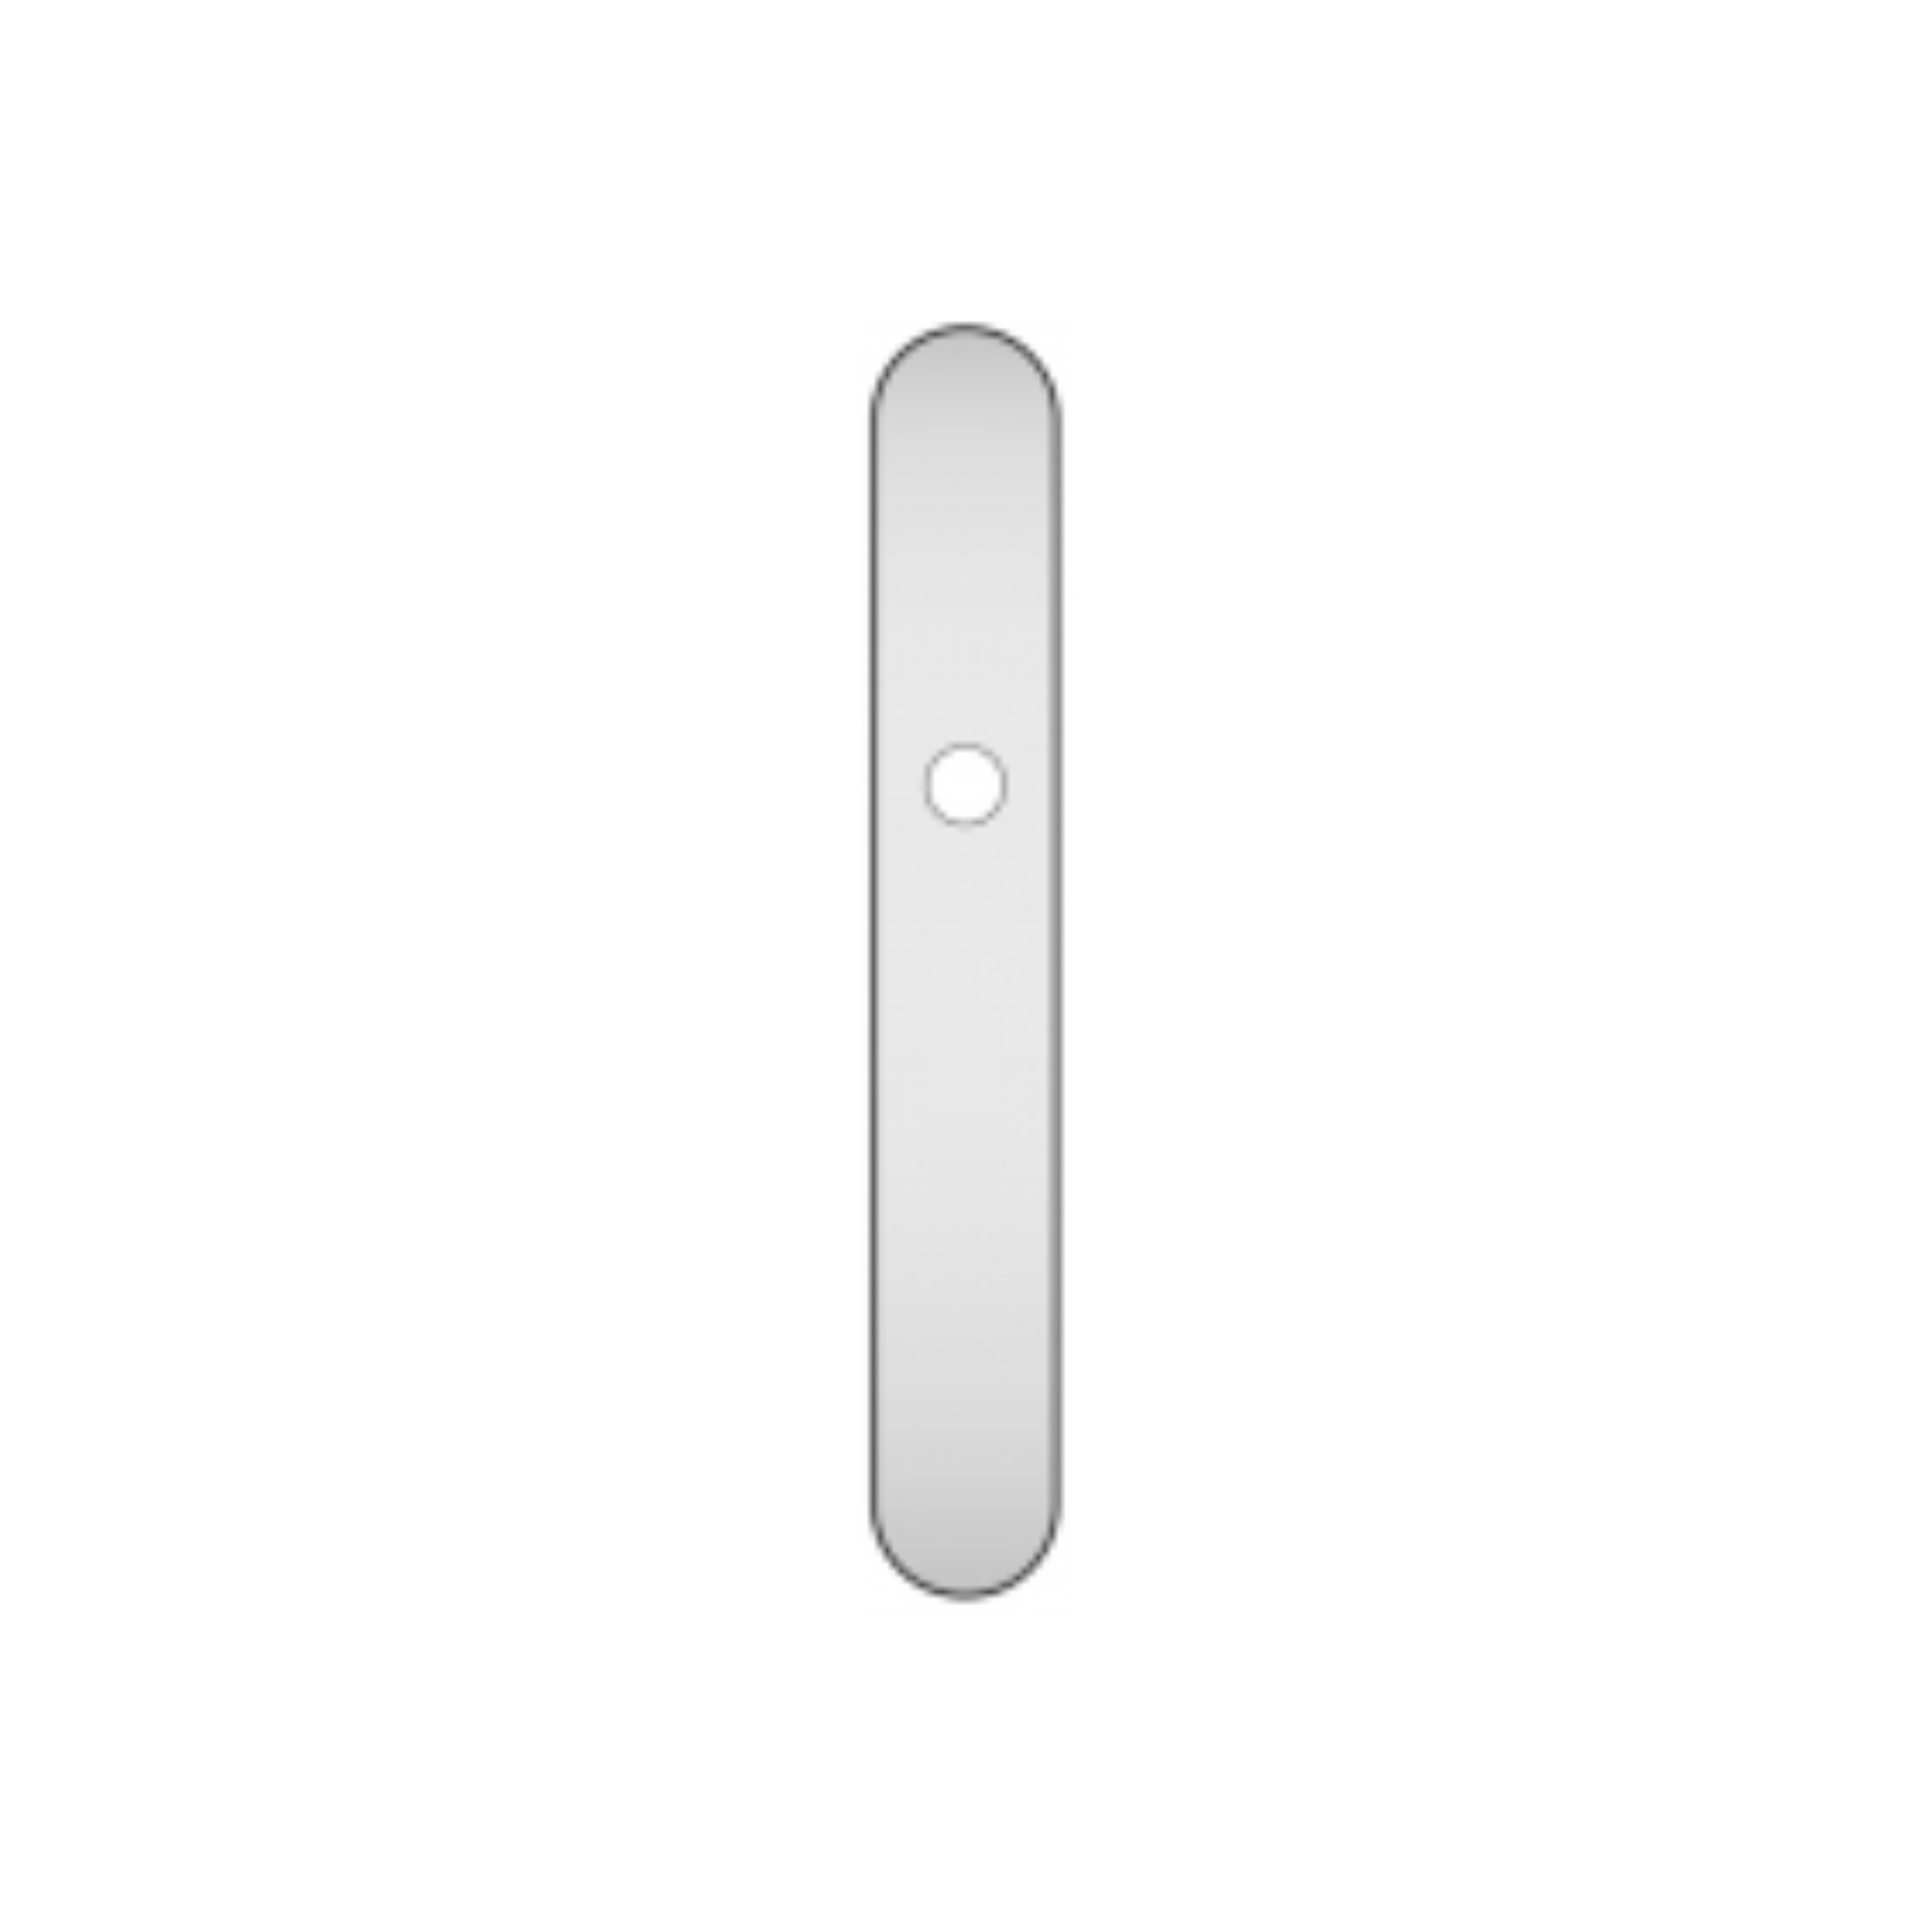 QS4483 BLANK, Plate, Narrow Oval, 245mm (l) x 36mm (w), Supplied with QS Handle, Stainless Steel, QS